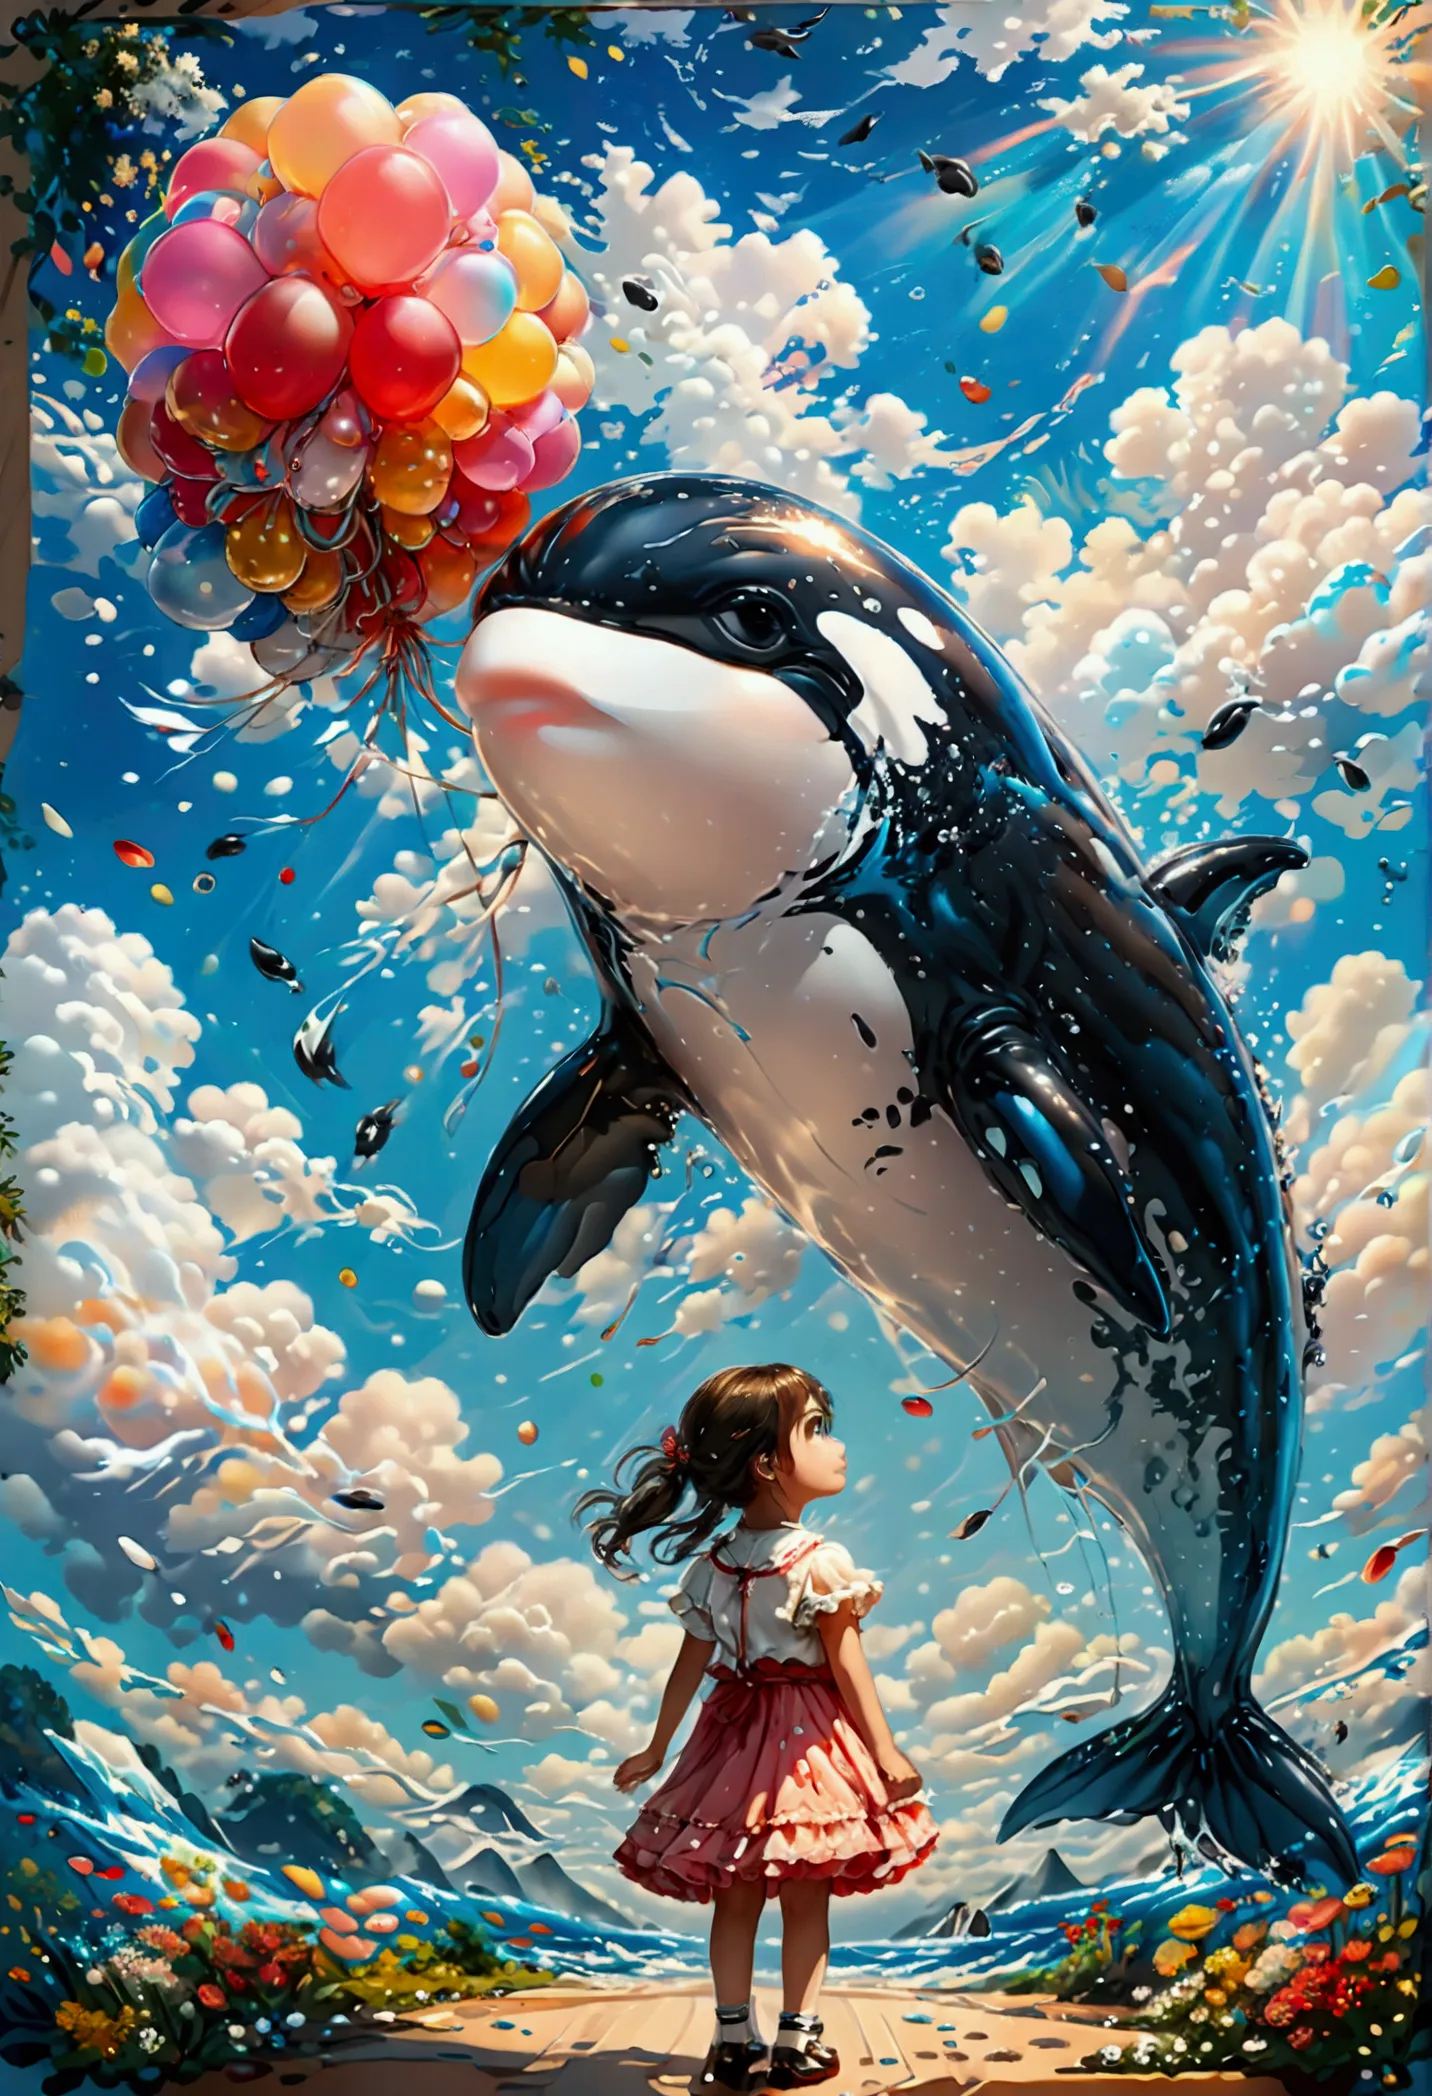 a digital paining of  balloon in the shape of killer whale being held by cute kindergarten girl, High Contrast, (masterpiece:1.5...